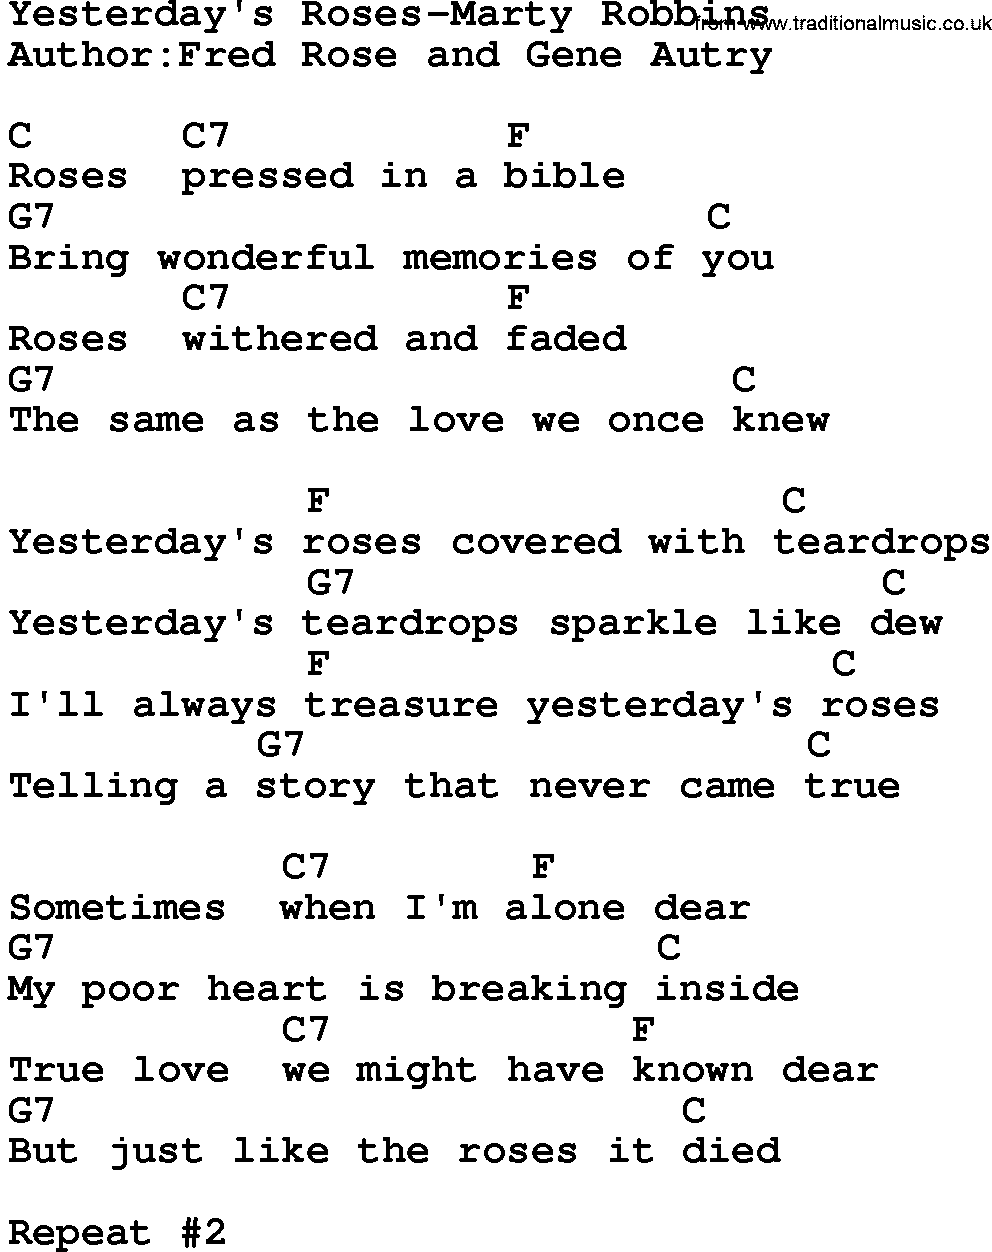 Country music song: Yesterday's Roses-Marty Robbins lyrics and chords